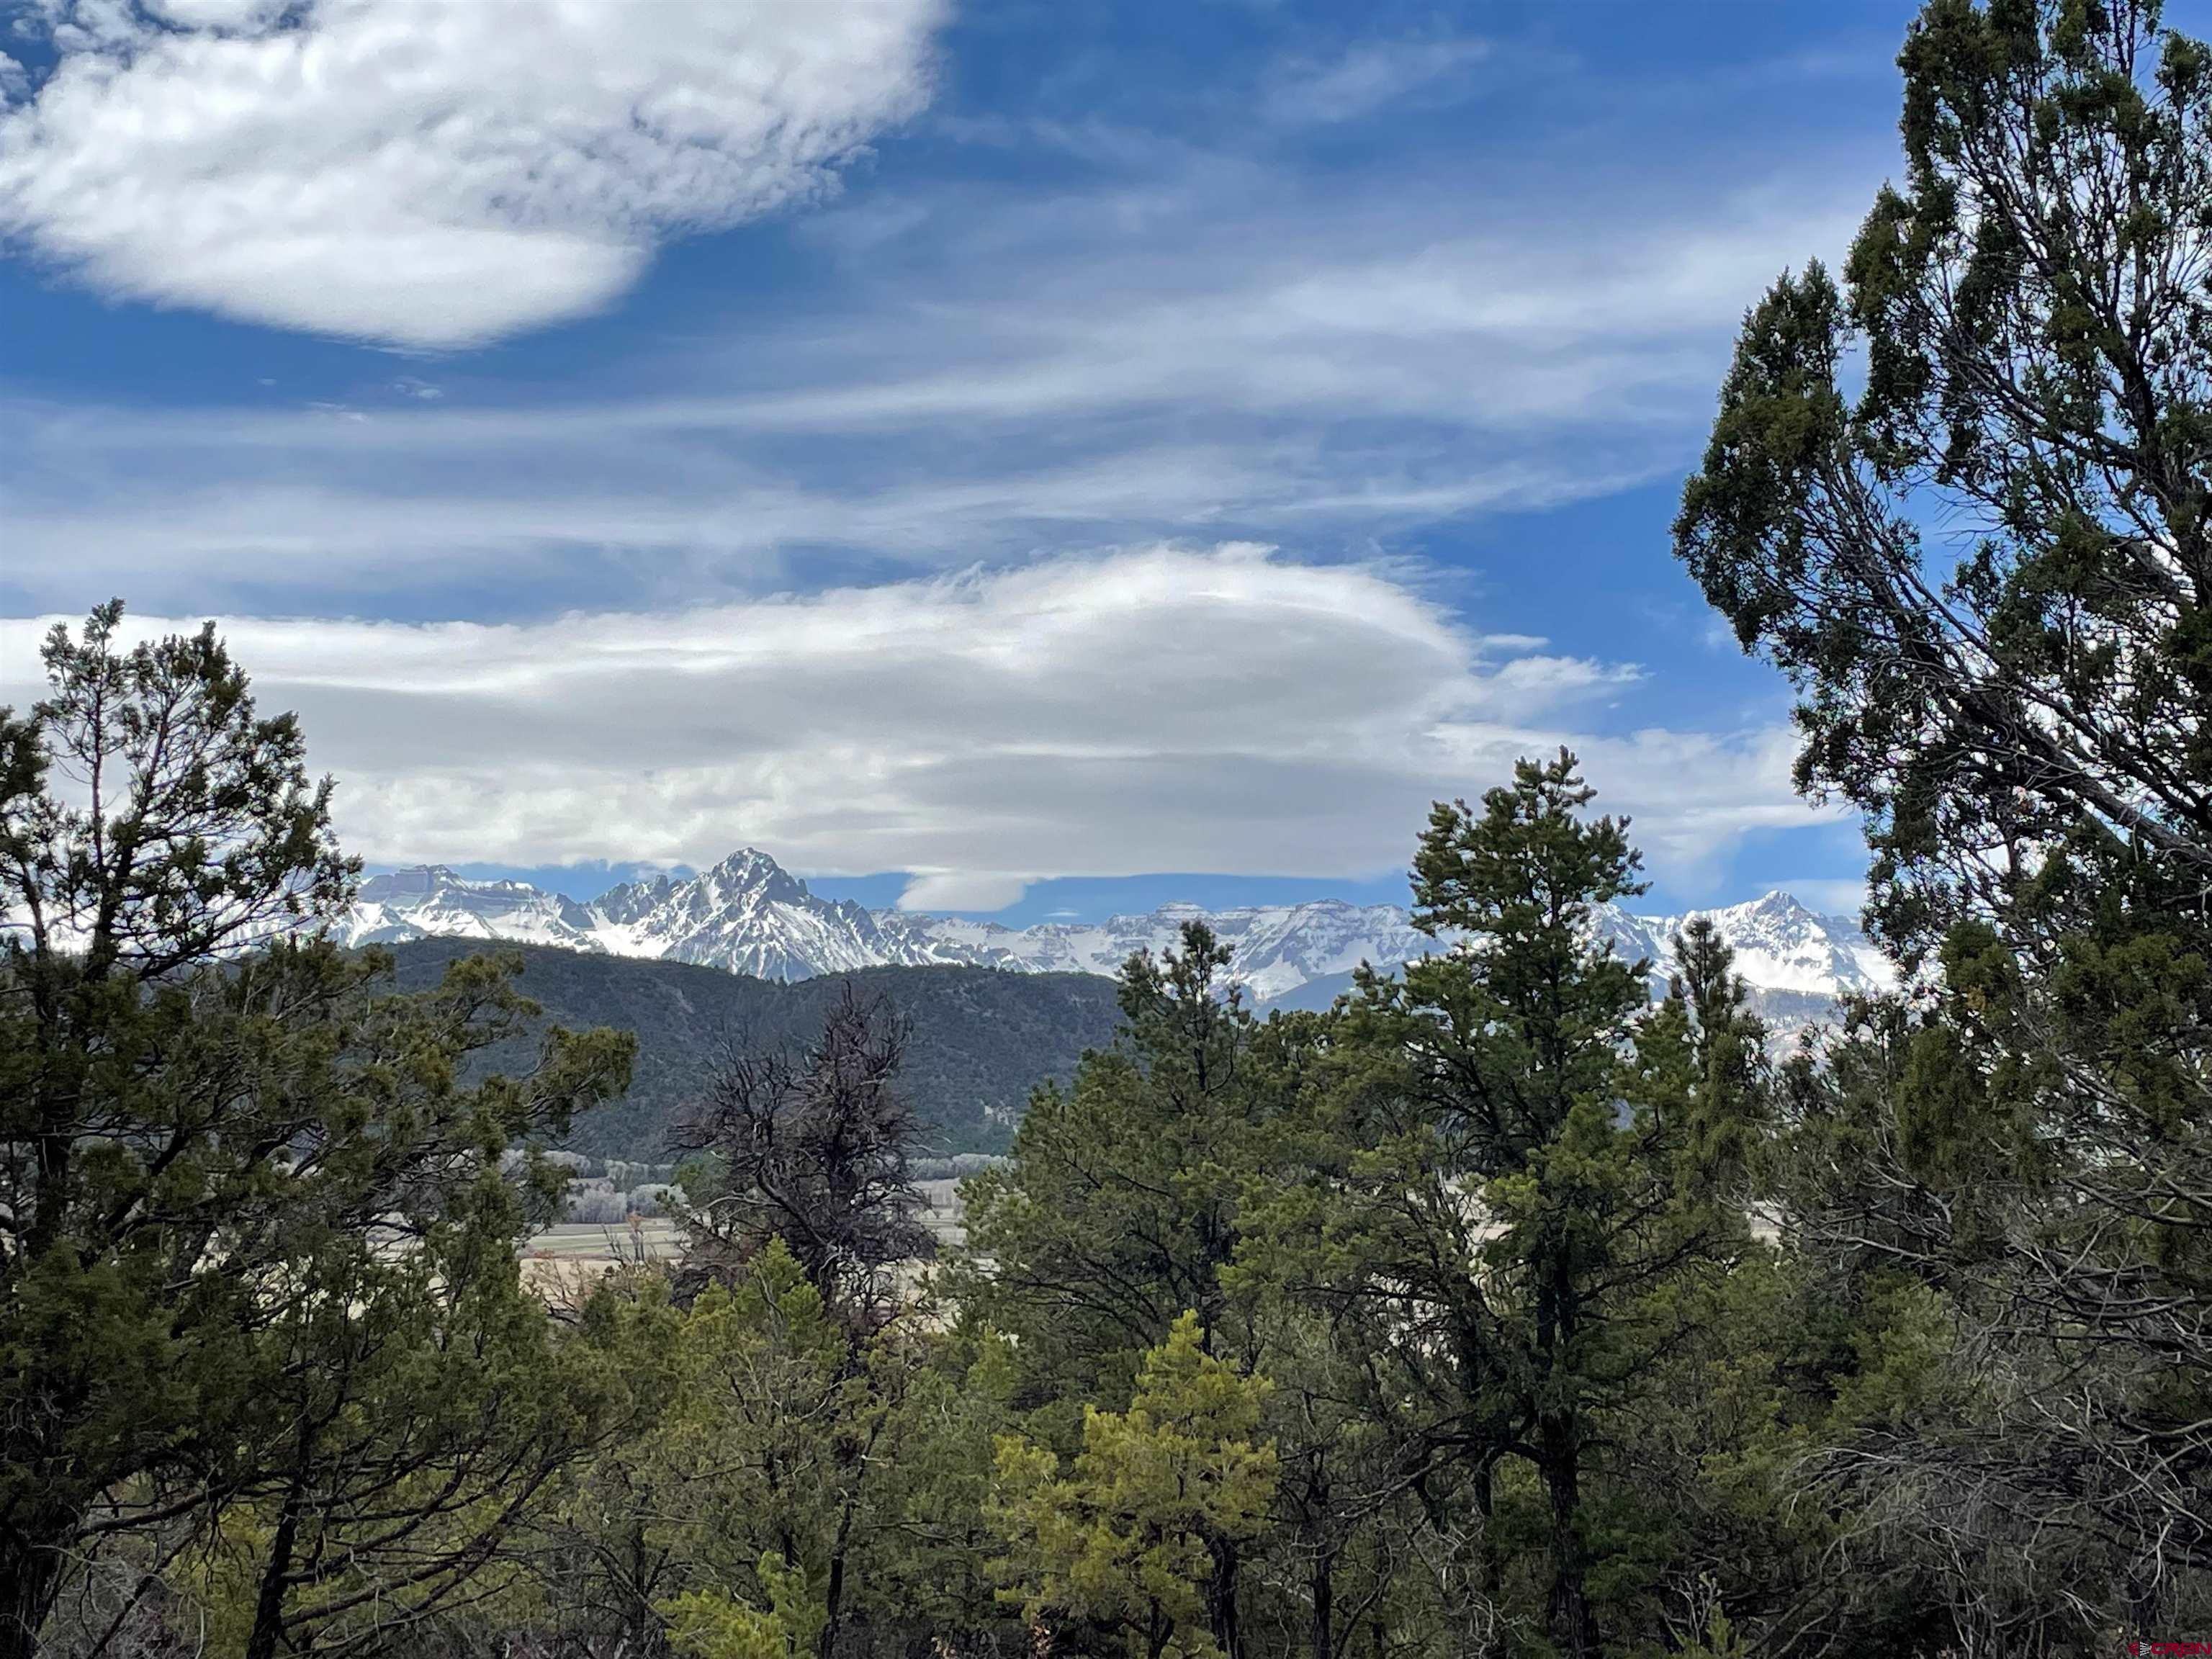 Are you looking for that very special lot with BIG Colorado mountain views for your primary or 2nd/vacation get-away home?  Look no further!  This rare and spectacular wooded 4-acre lot in the Promontories subdivision is close to the Town of Ridgway and the nearby communities of Ouray, Telluride, and Montrose.  It is located off a paved road at the end of a cul de sac, with electricity, natural gas, and Tri-County water at the lot line  There are several building sites to choose from on this lightly sloping lot which, strategically placed and with some clearing, will afford magnificent 280-degree unobstructed views of the Mt. Sneffels and Cimarron mountain ranges and the Ridgway and Ouray Valleys below.  The north boundary adjoins the subdivision's open space which lot owners may use for recreational purposes, e.g., hiking.  Seasonal streams run through this beautiful, bucolic parcel.  Gorgeous custom homes have already been built on several lots within the subdivision.  This is a perfect spot to add your own gorgeous custom home close to all that Ridgway and the San Juan Mountain Region have to offer, from outdoor activities to fine dining and entertainment, and health and wellness opportunities (think yoga, message, and soaking in hot springs).  Drive by and check it out today, or call for more information.  It won't last long!